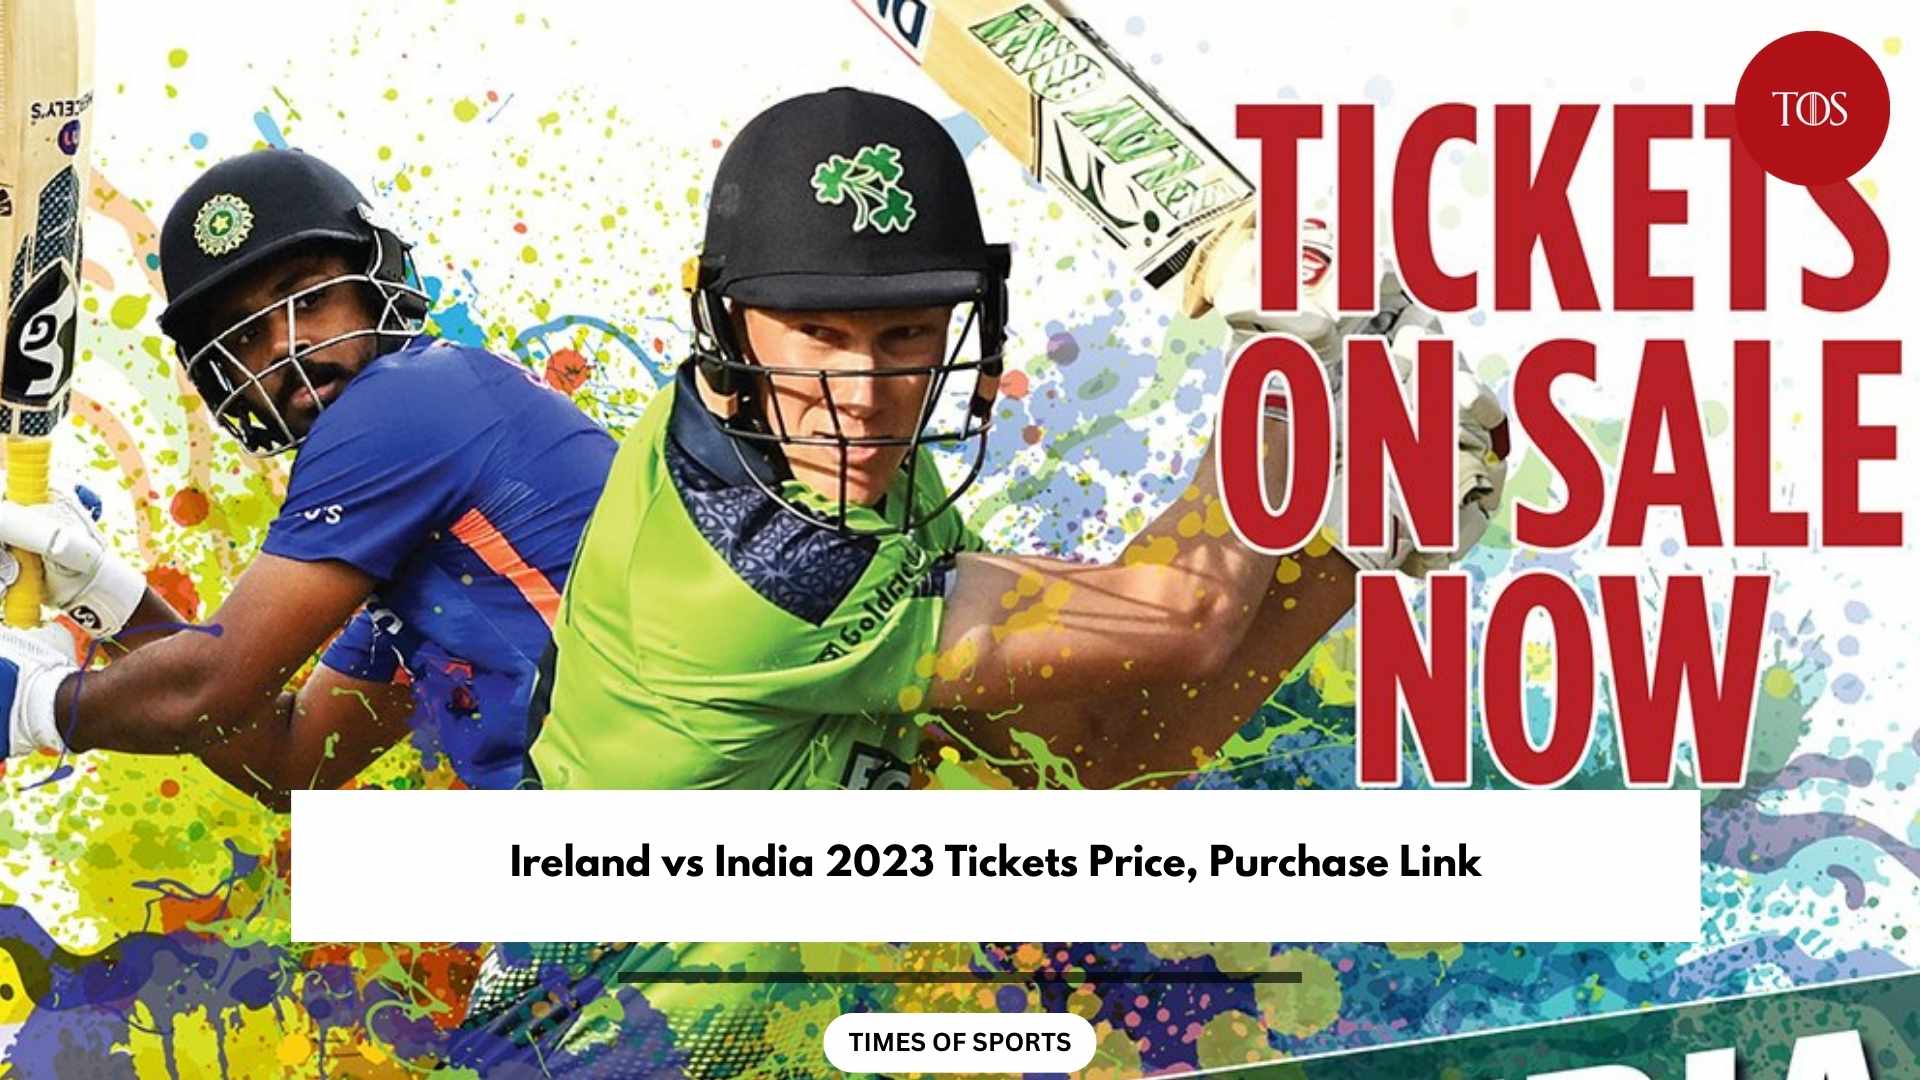 Ireland vs India 2023 Tickets Price, Purchase Link